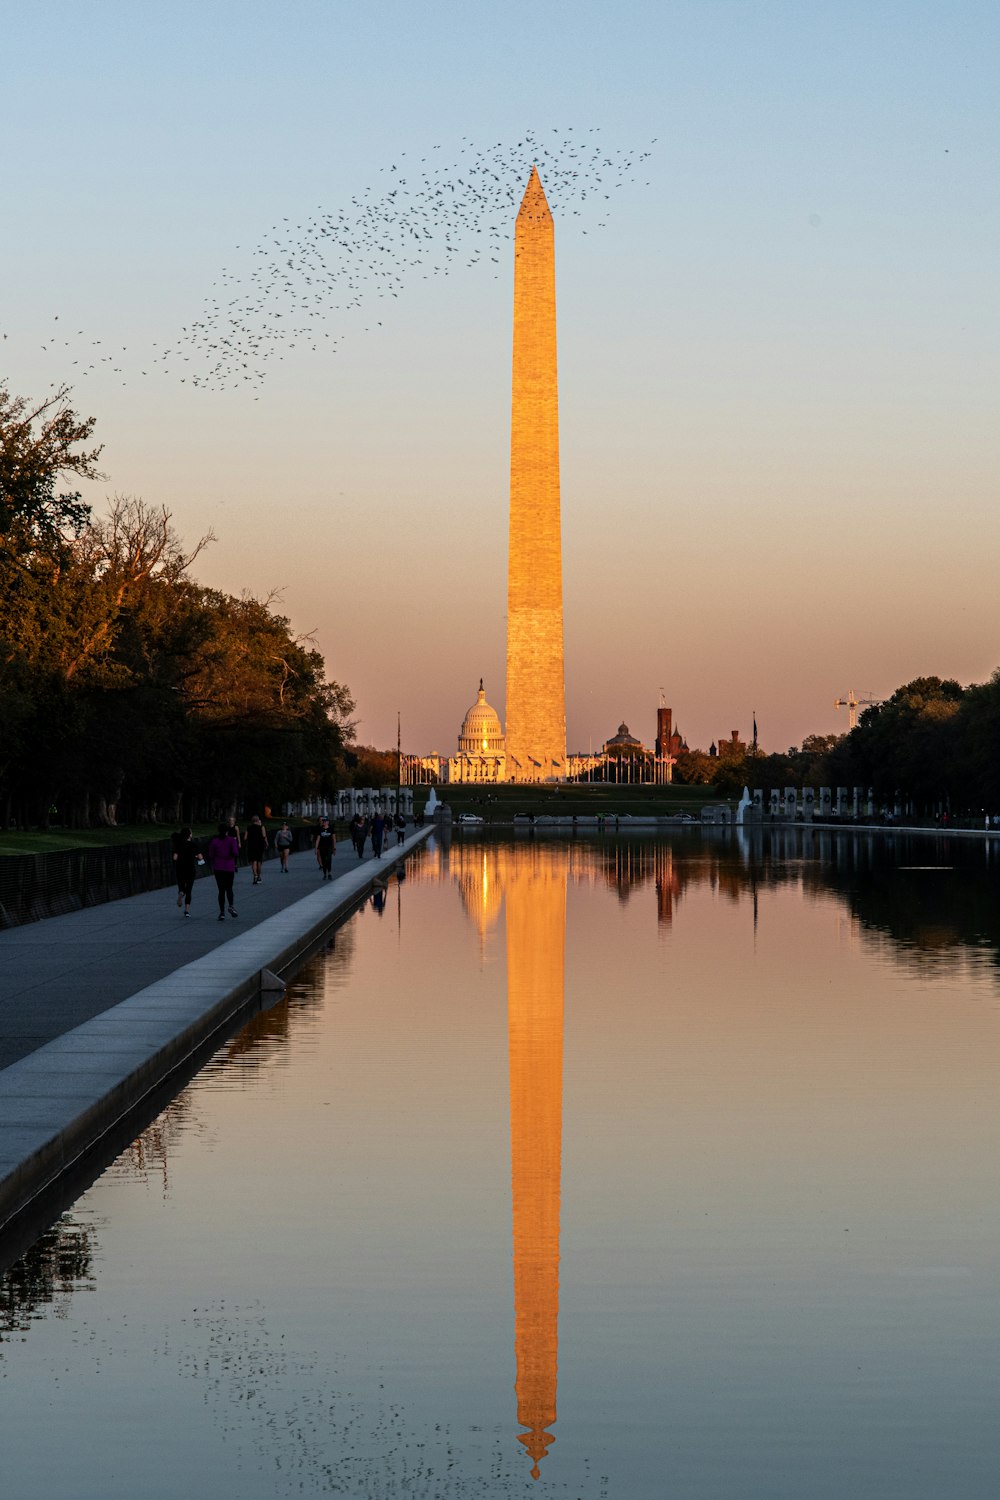 a flock of birds flying over the washington monument